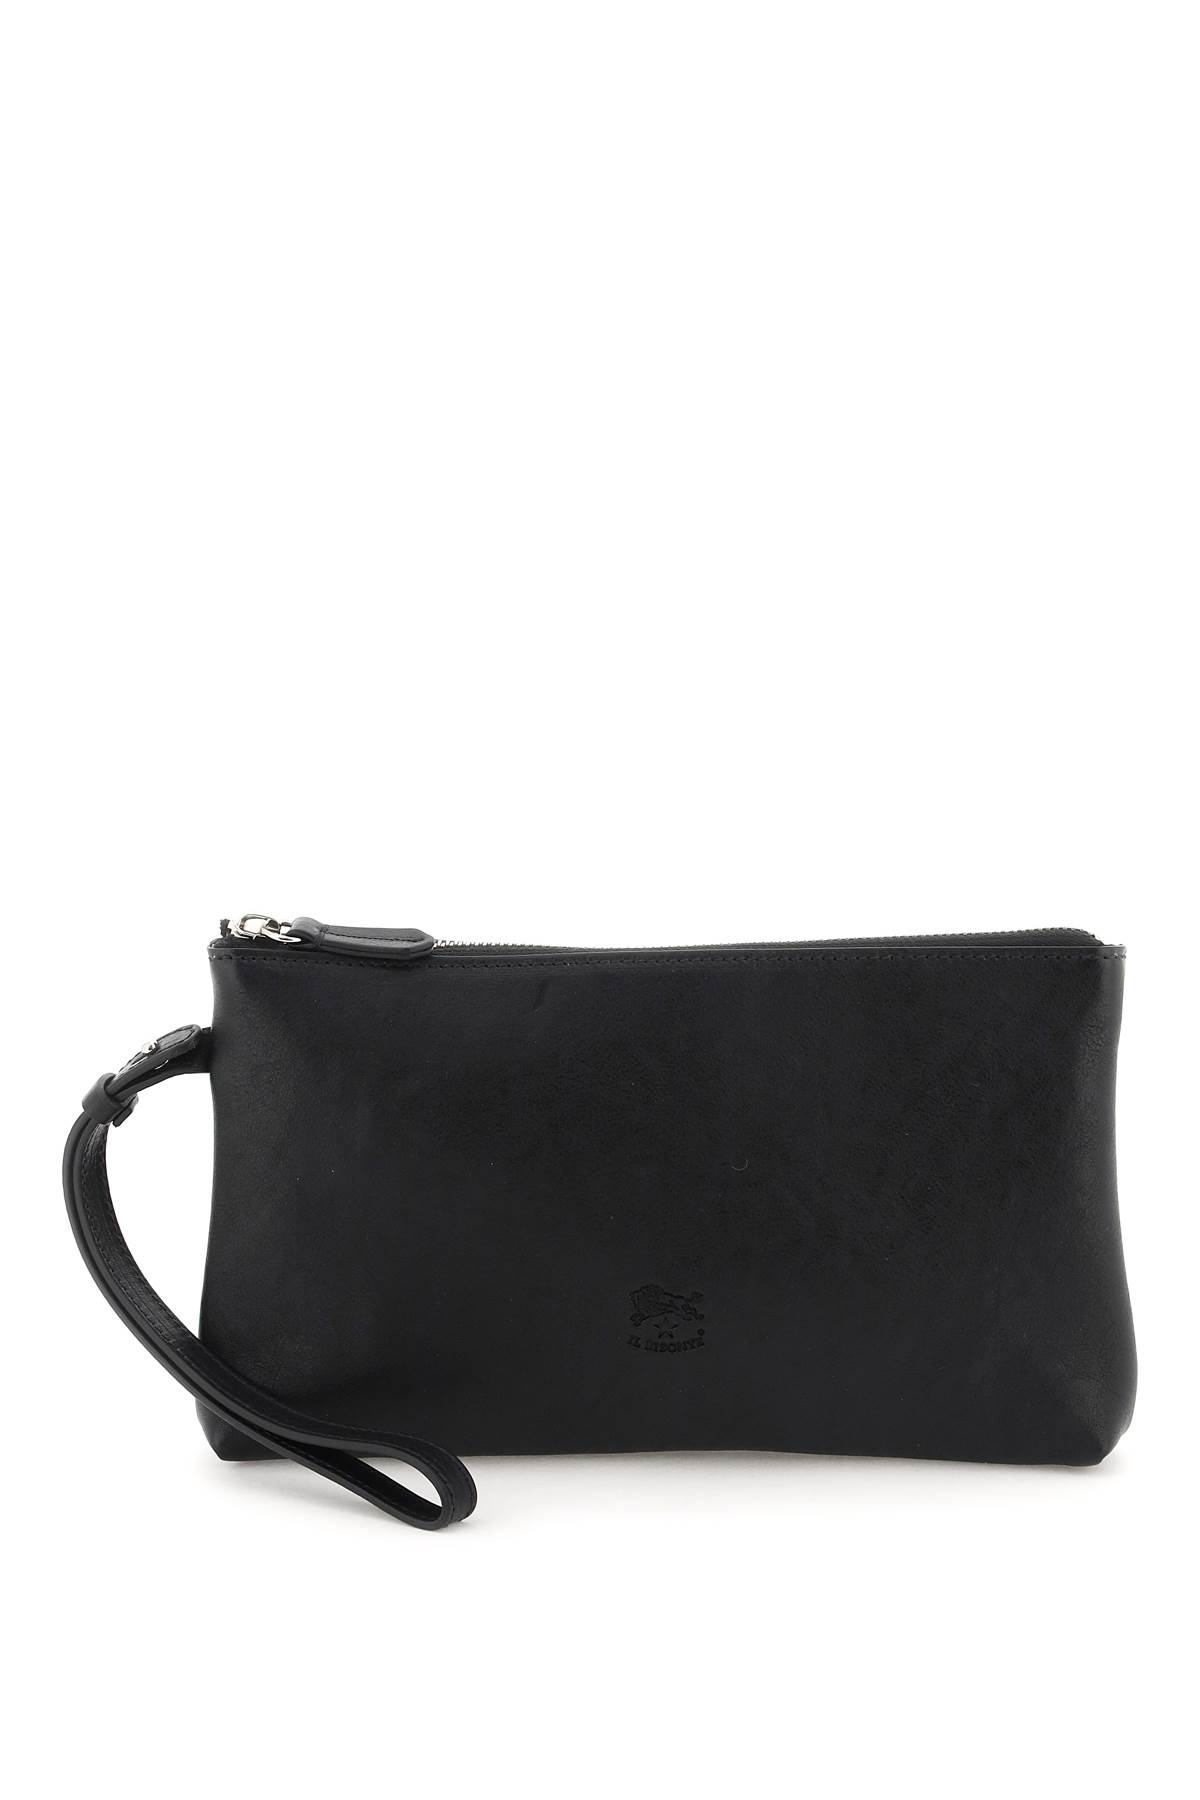 Il Bisonte Leather Pouch